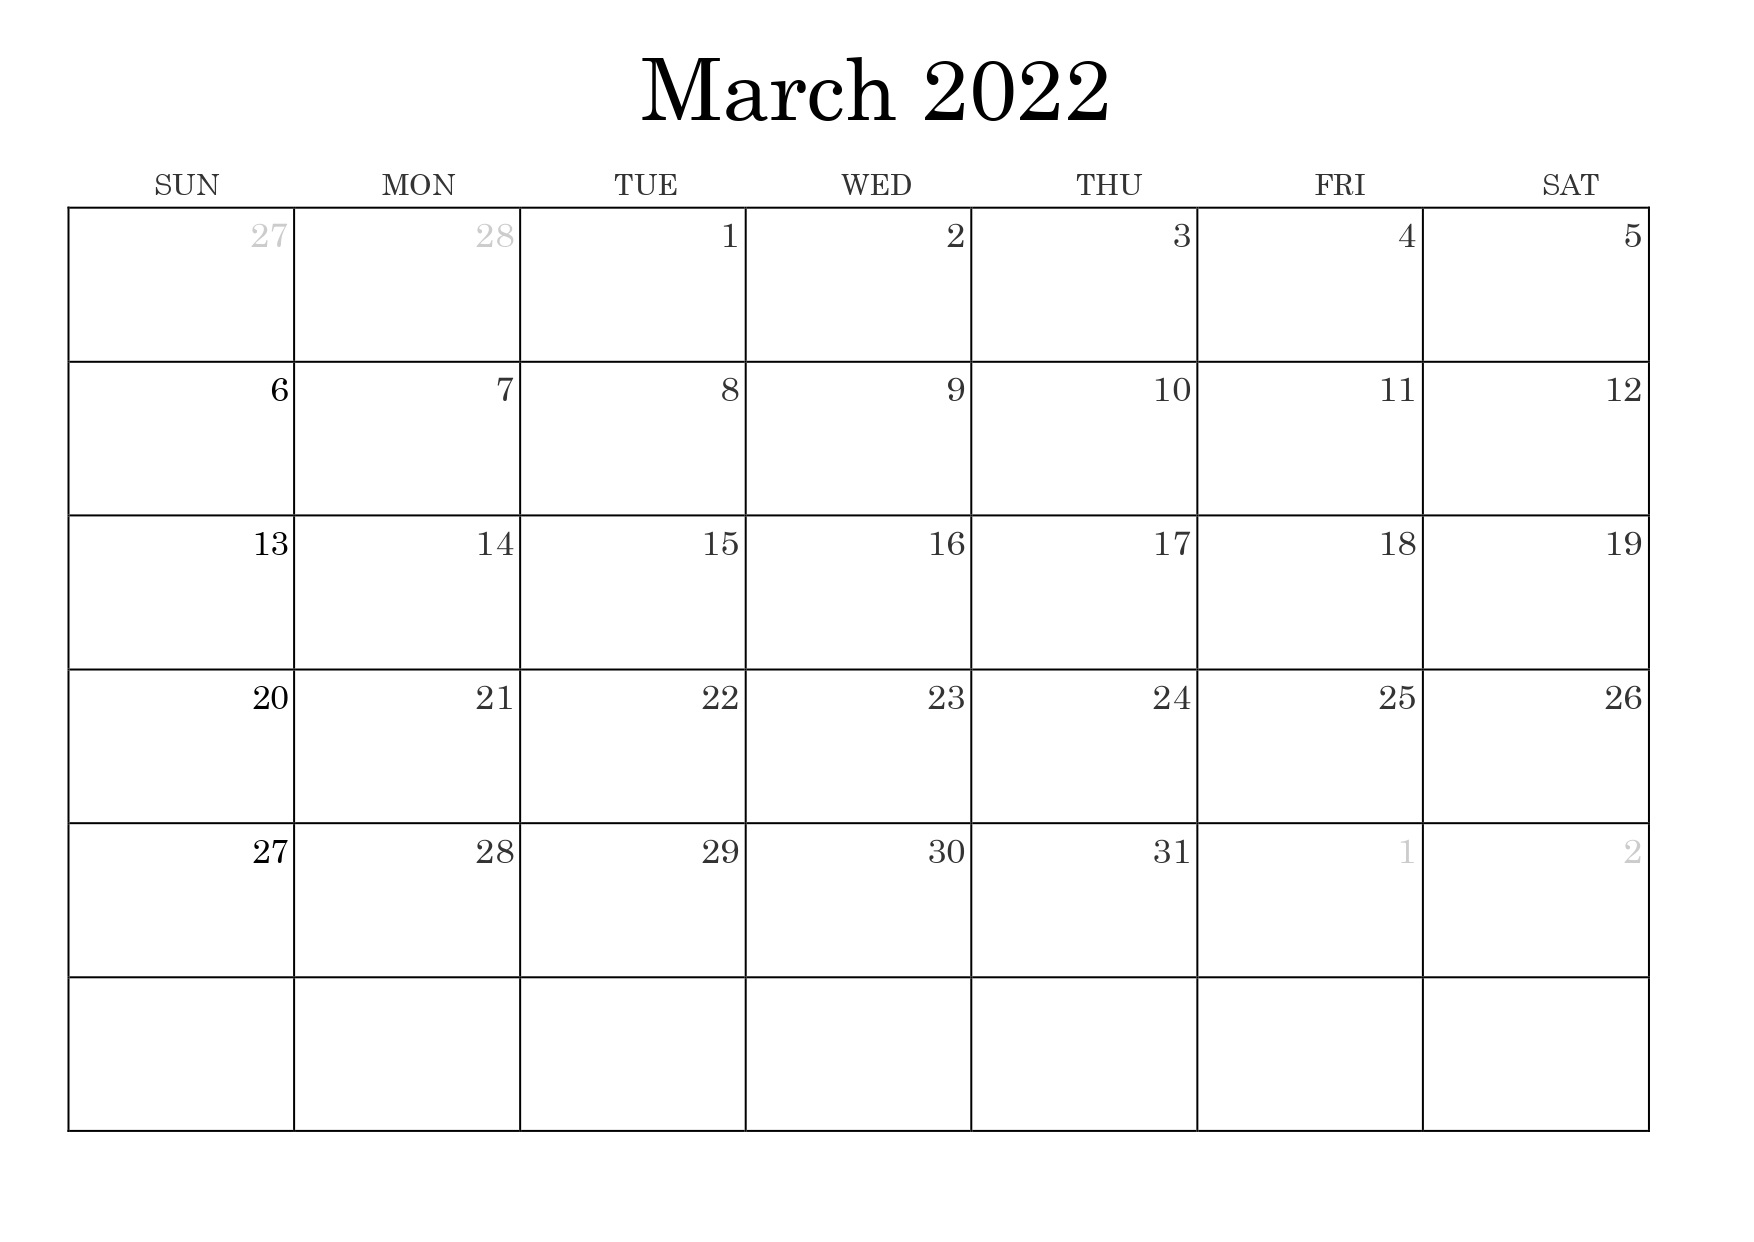 March 2022 Calendar With Festivals